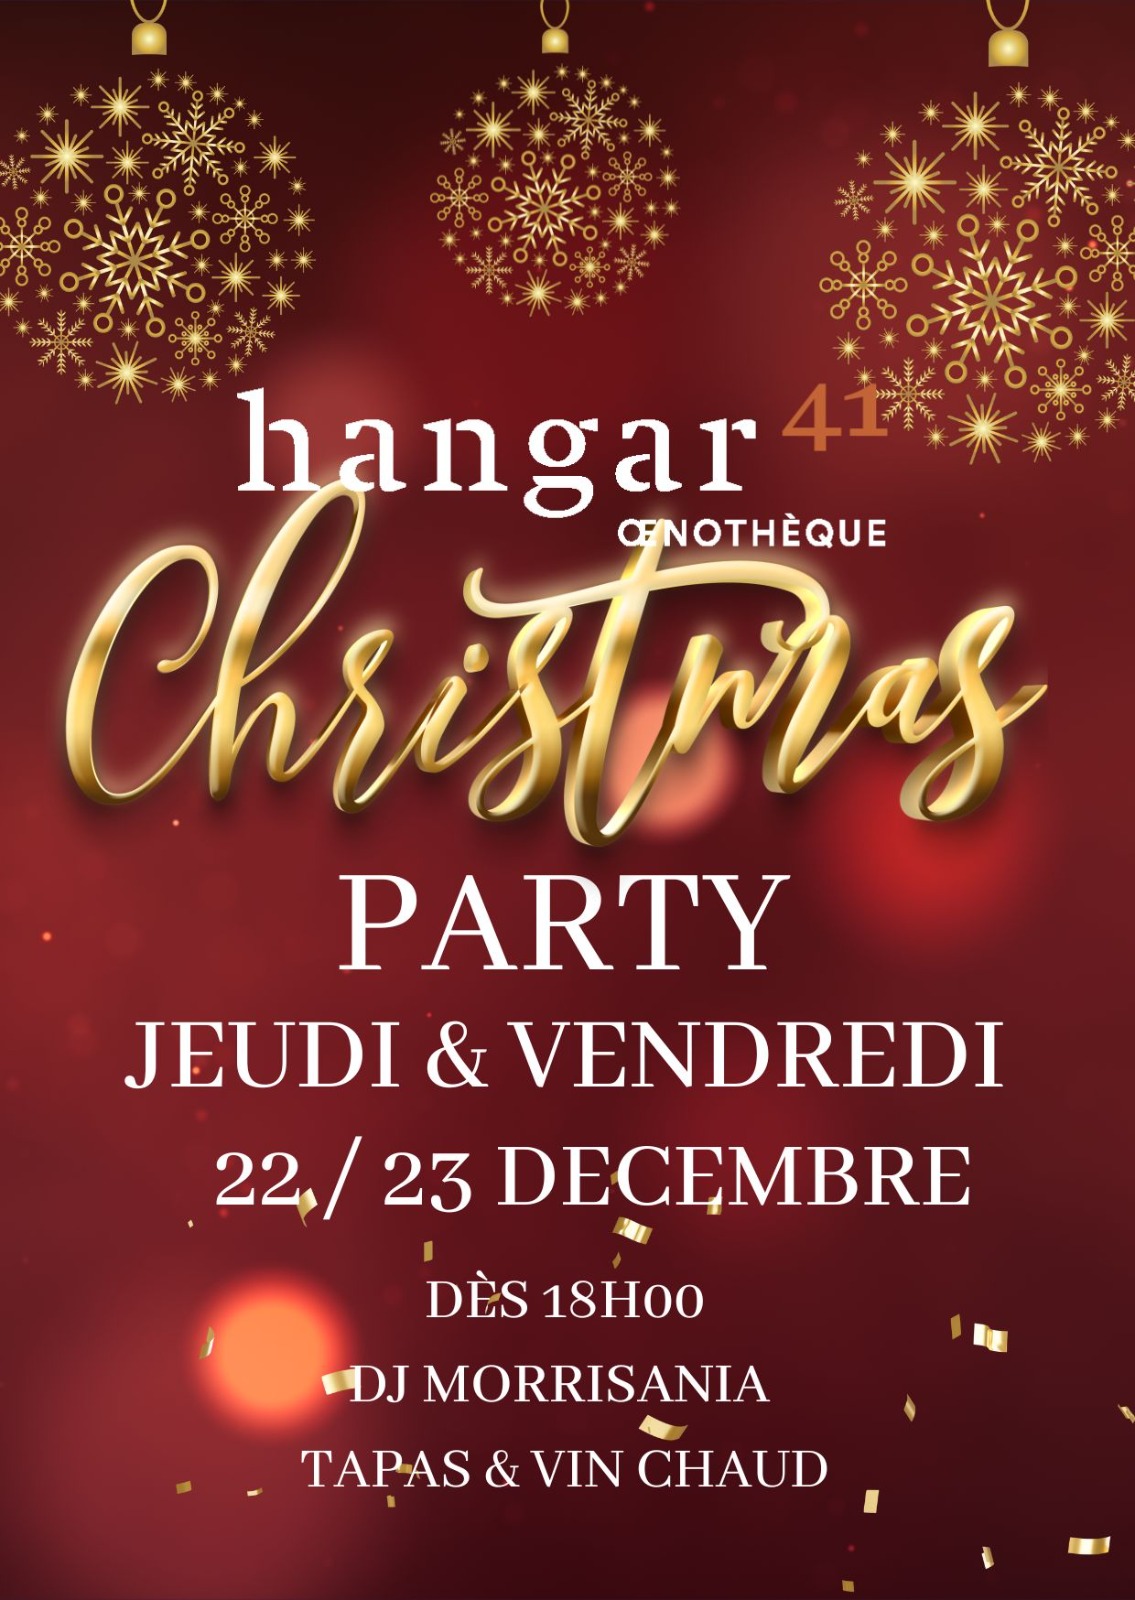 22.12.22 – 23.12.22 – CHRISTMAS PARTY